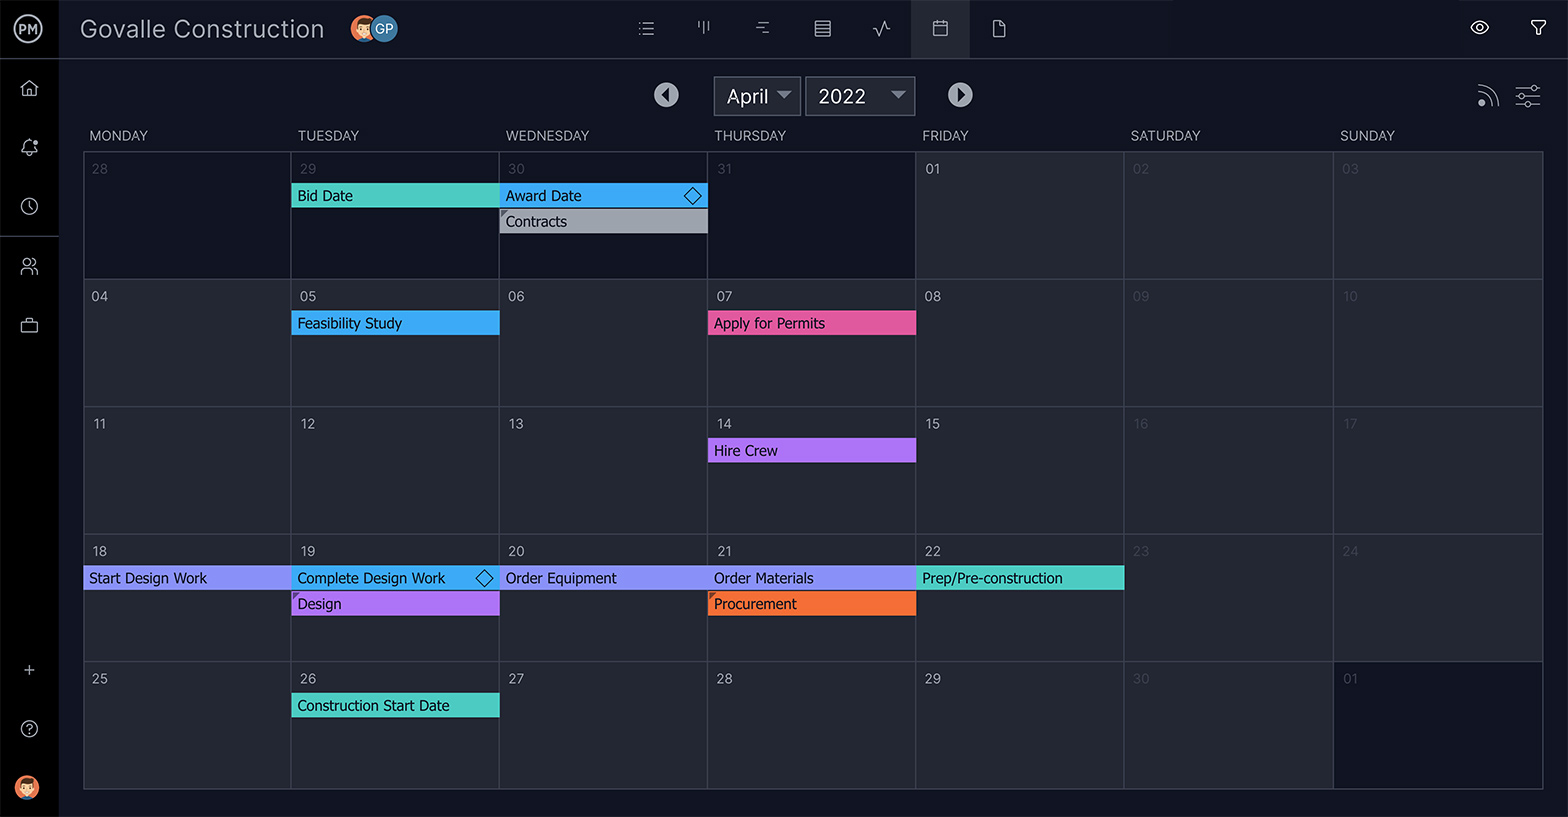 A screenshot of the scheduling features in a gantt chart in ProjectManager.com